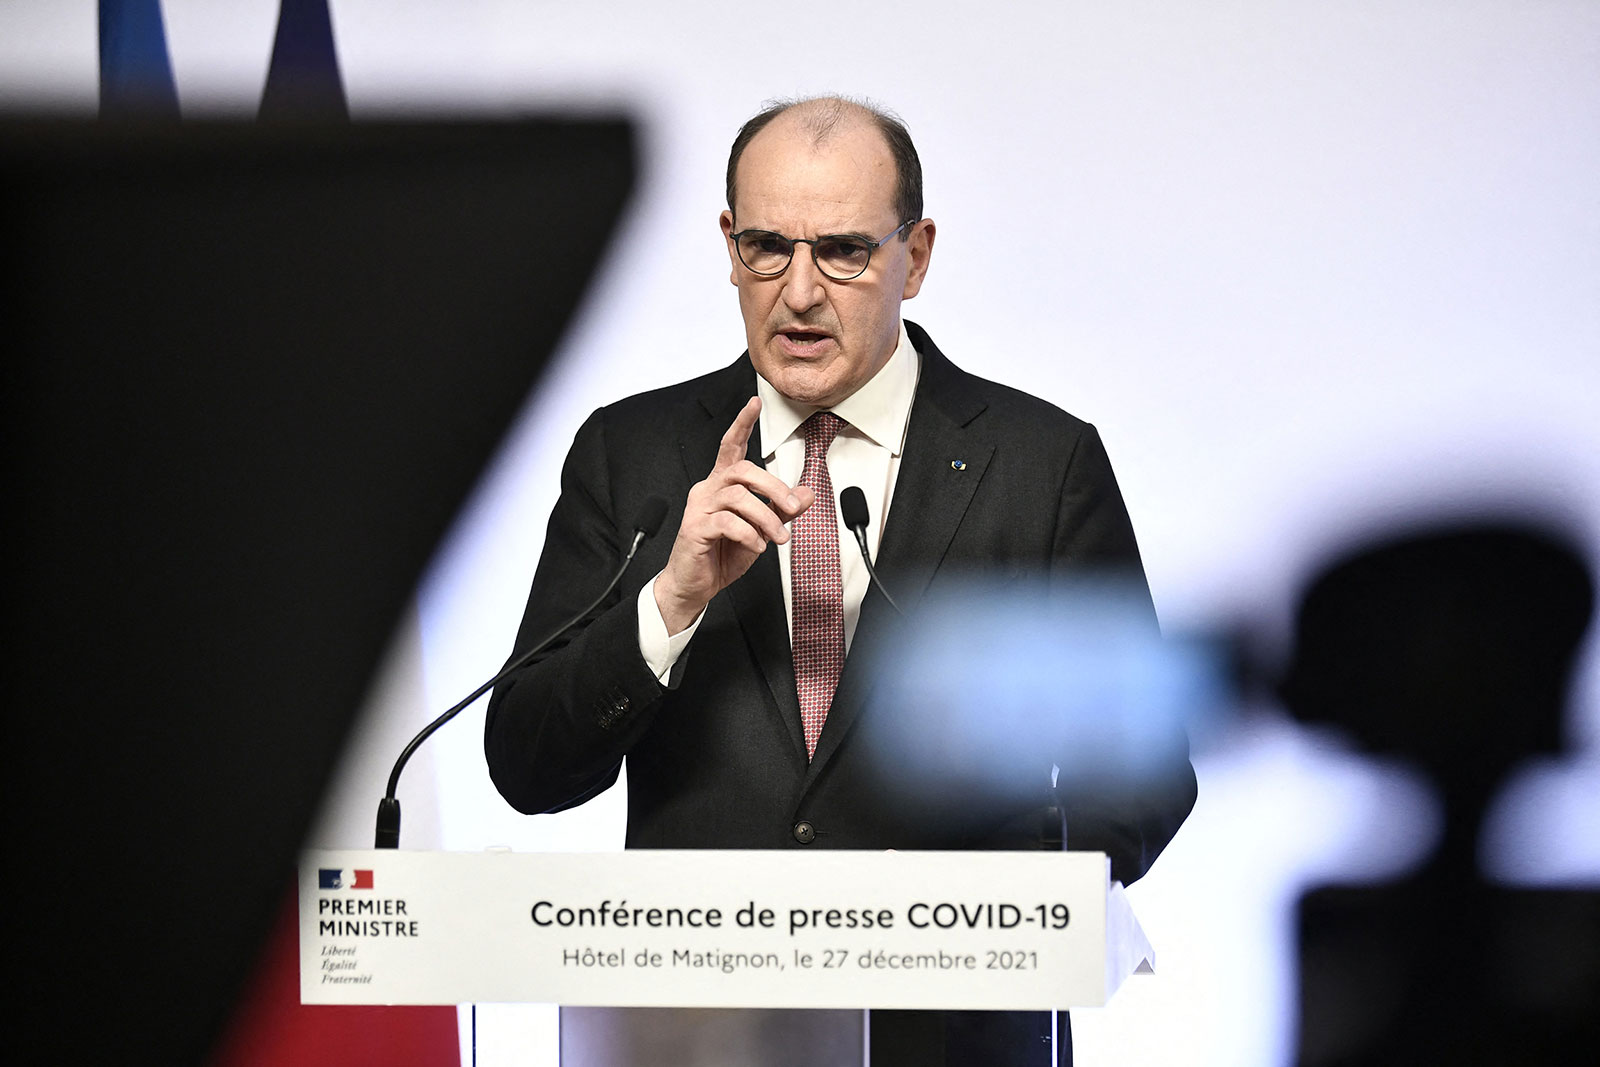 French Prime Minister Jean Castex speaks during a press conference on December 27.